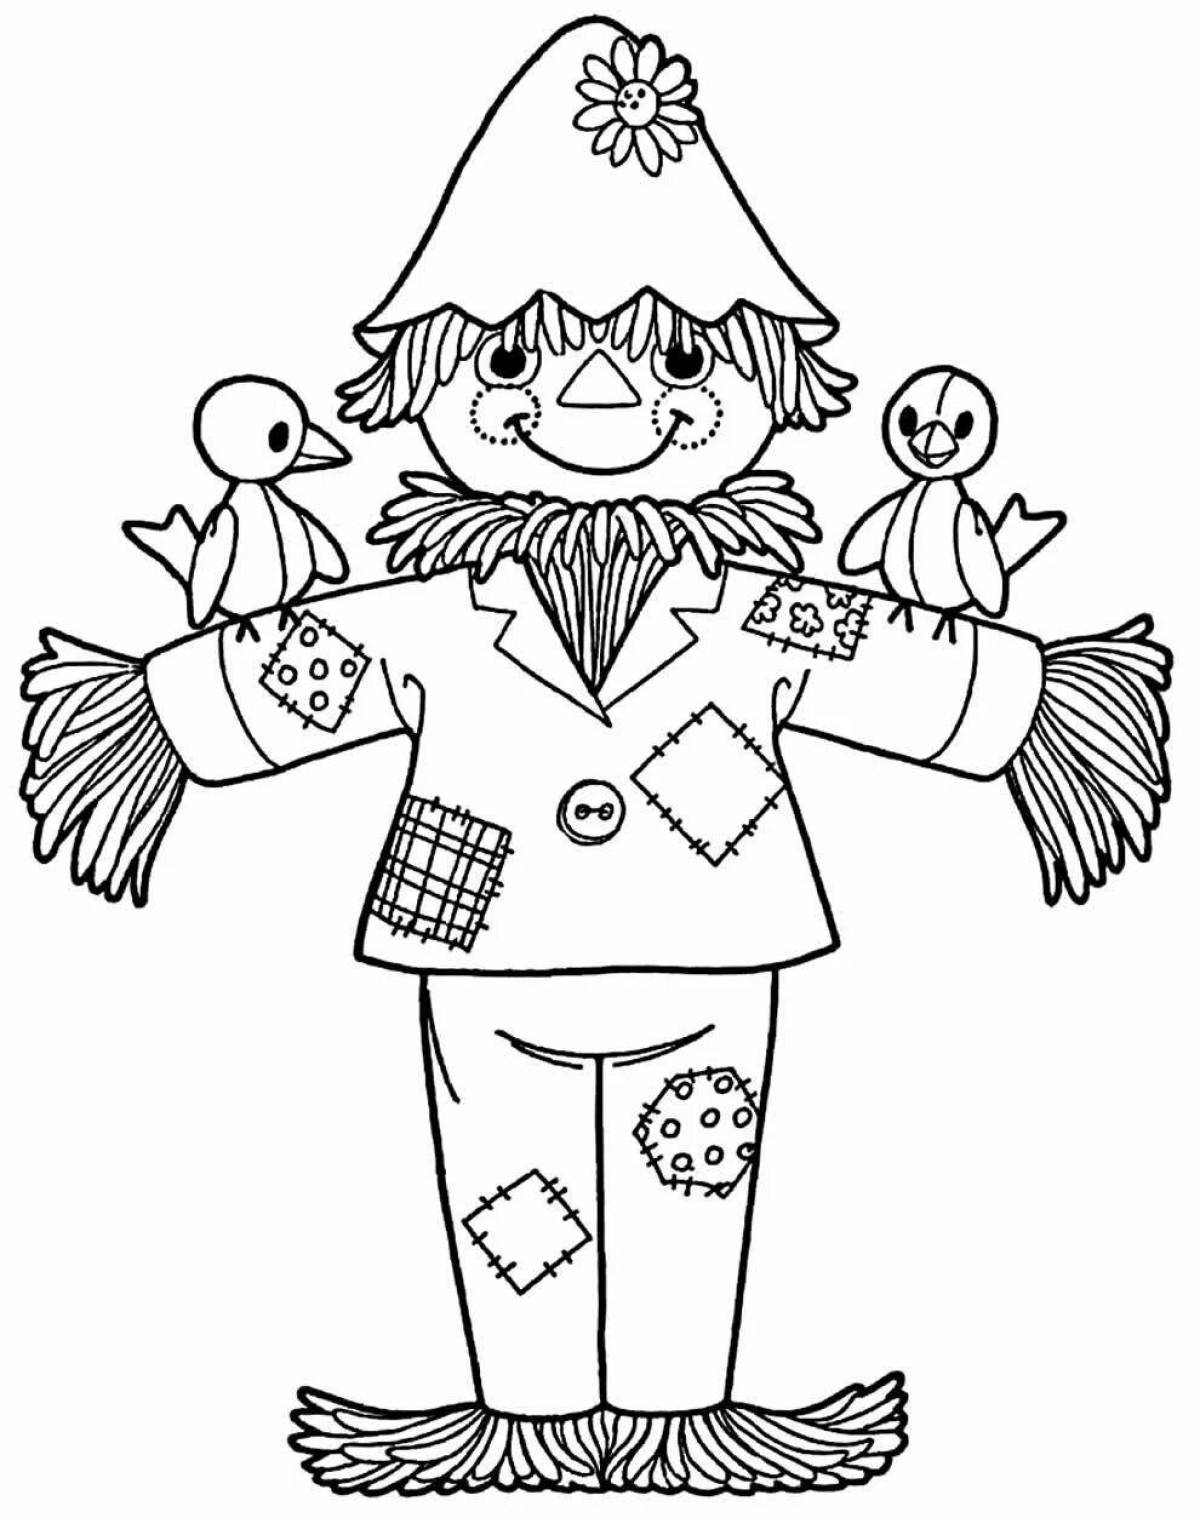 Glorious carnival scarecrow coloring page